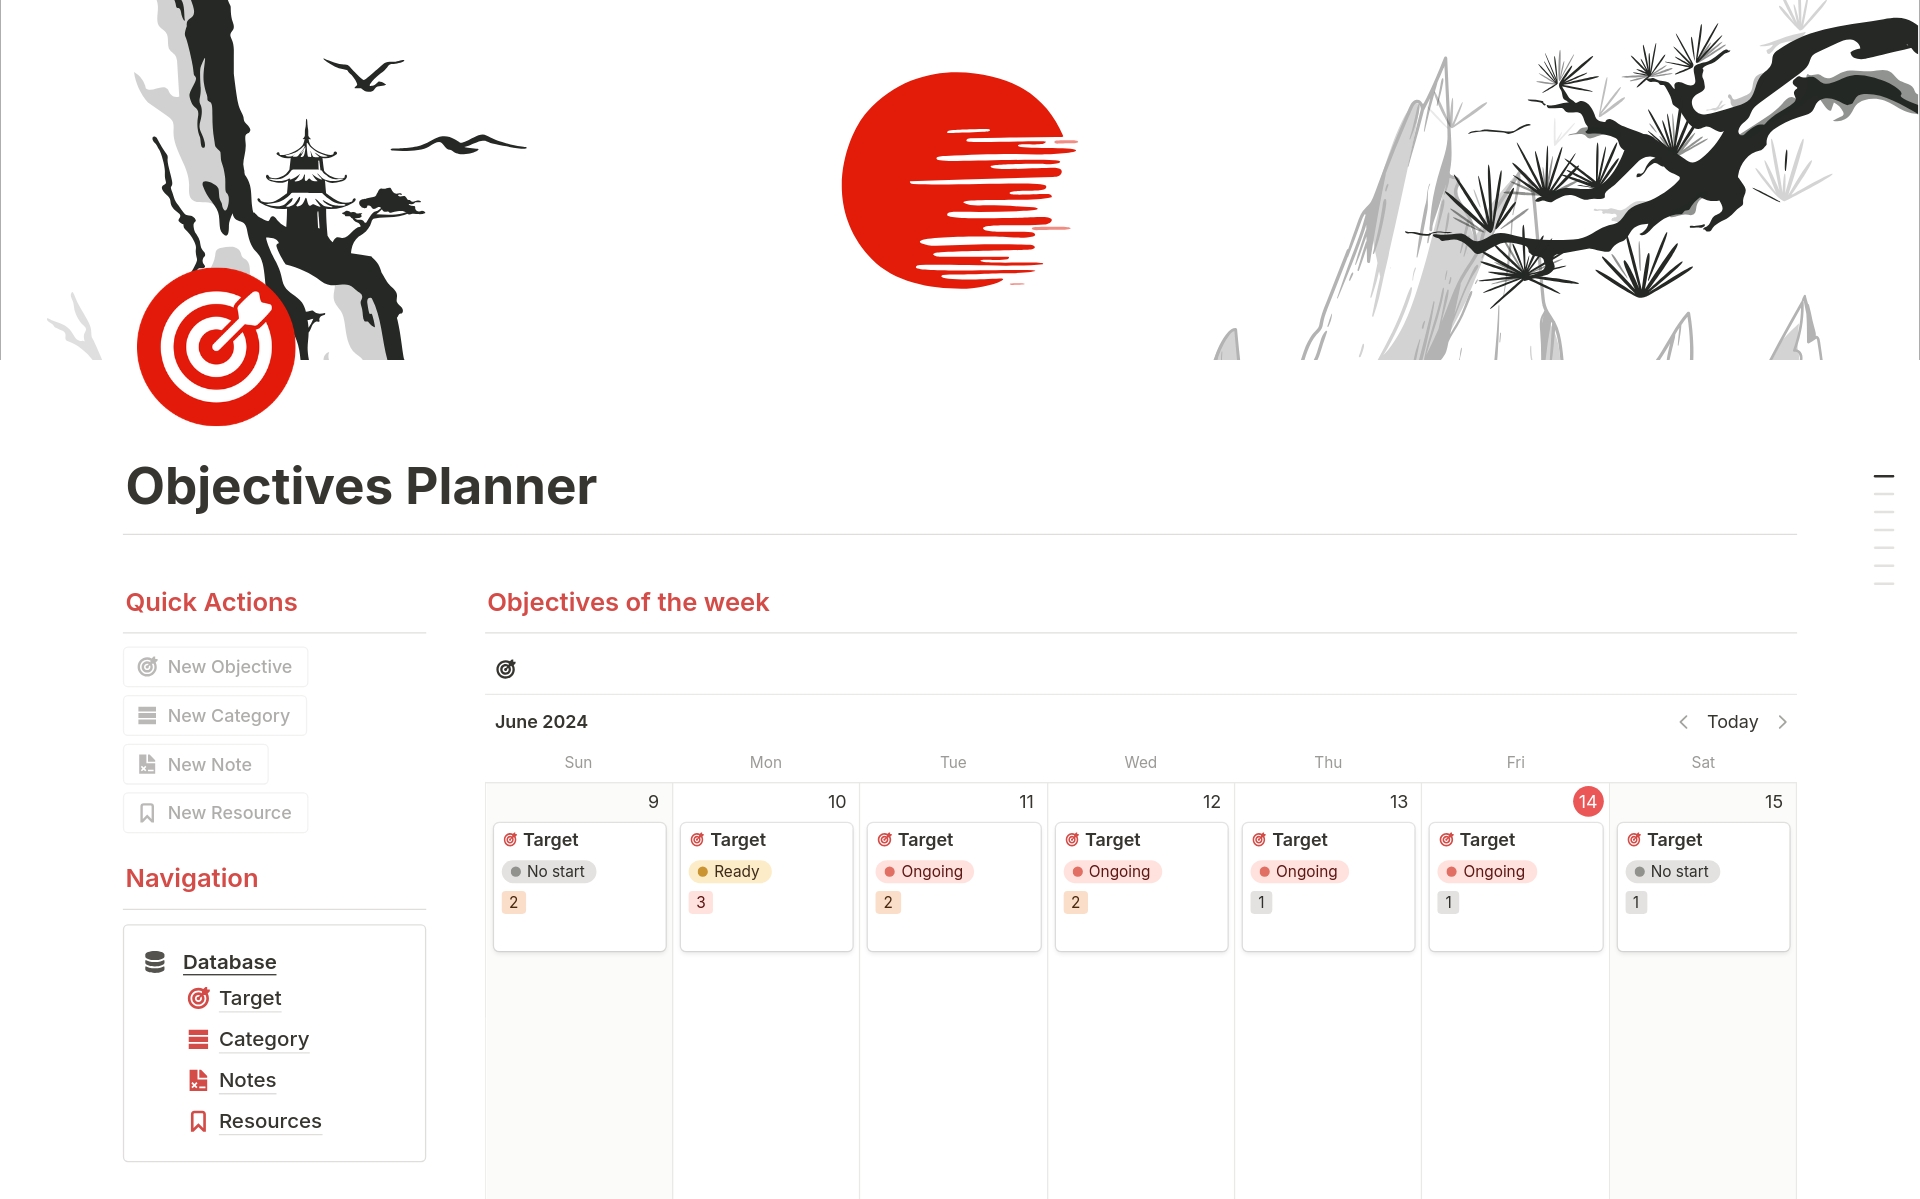 Discover a fresh and effective way to organize your goals with the "Goals Planner". Simplify your projects and focus on what really matters, transform your dreams into reality with this dynamic and easy-to-use tool!

